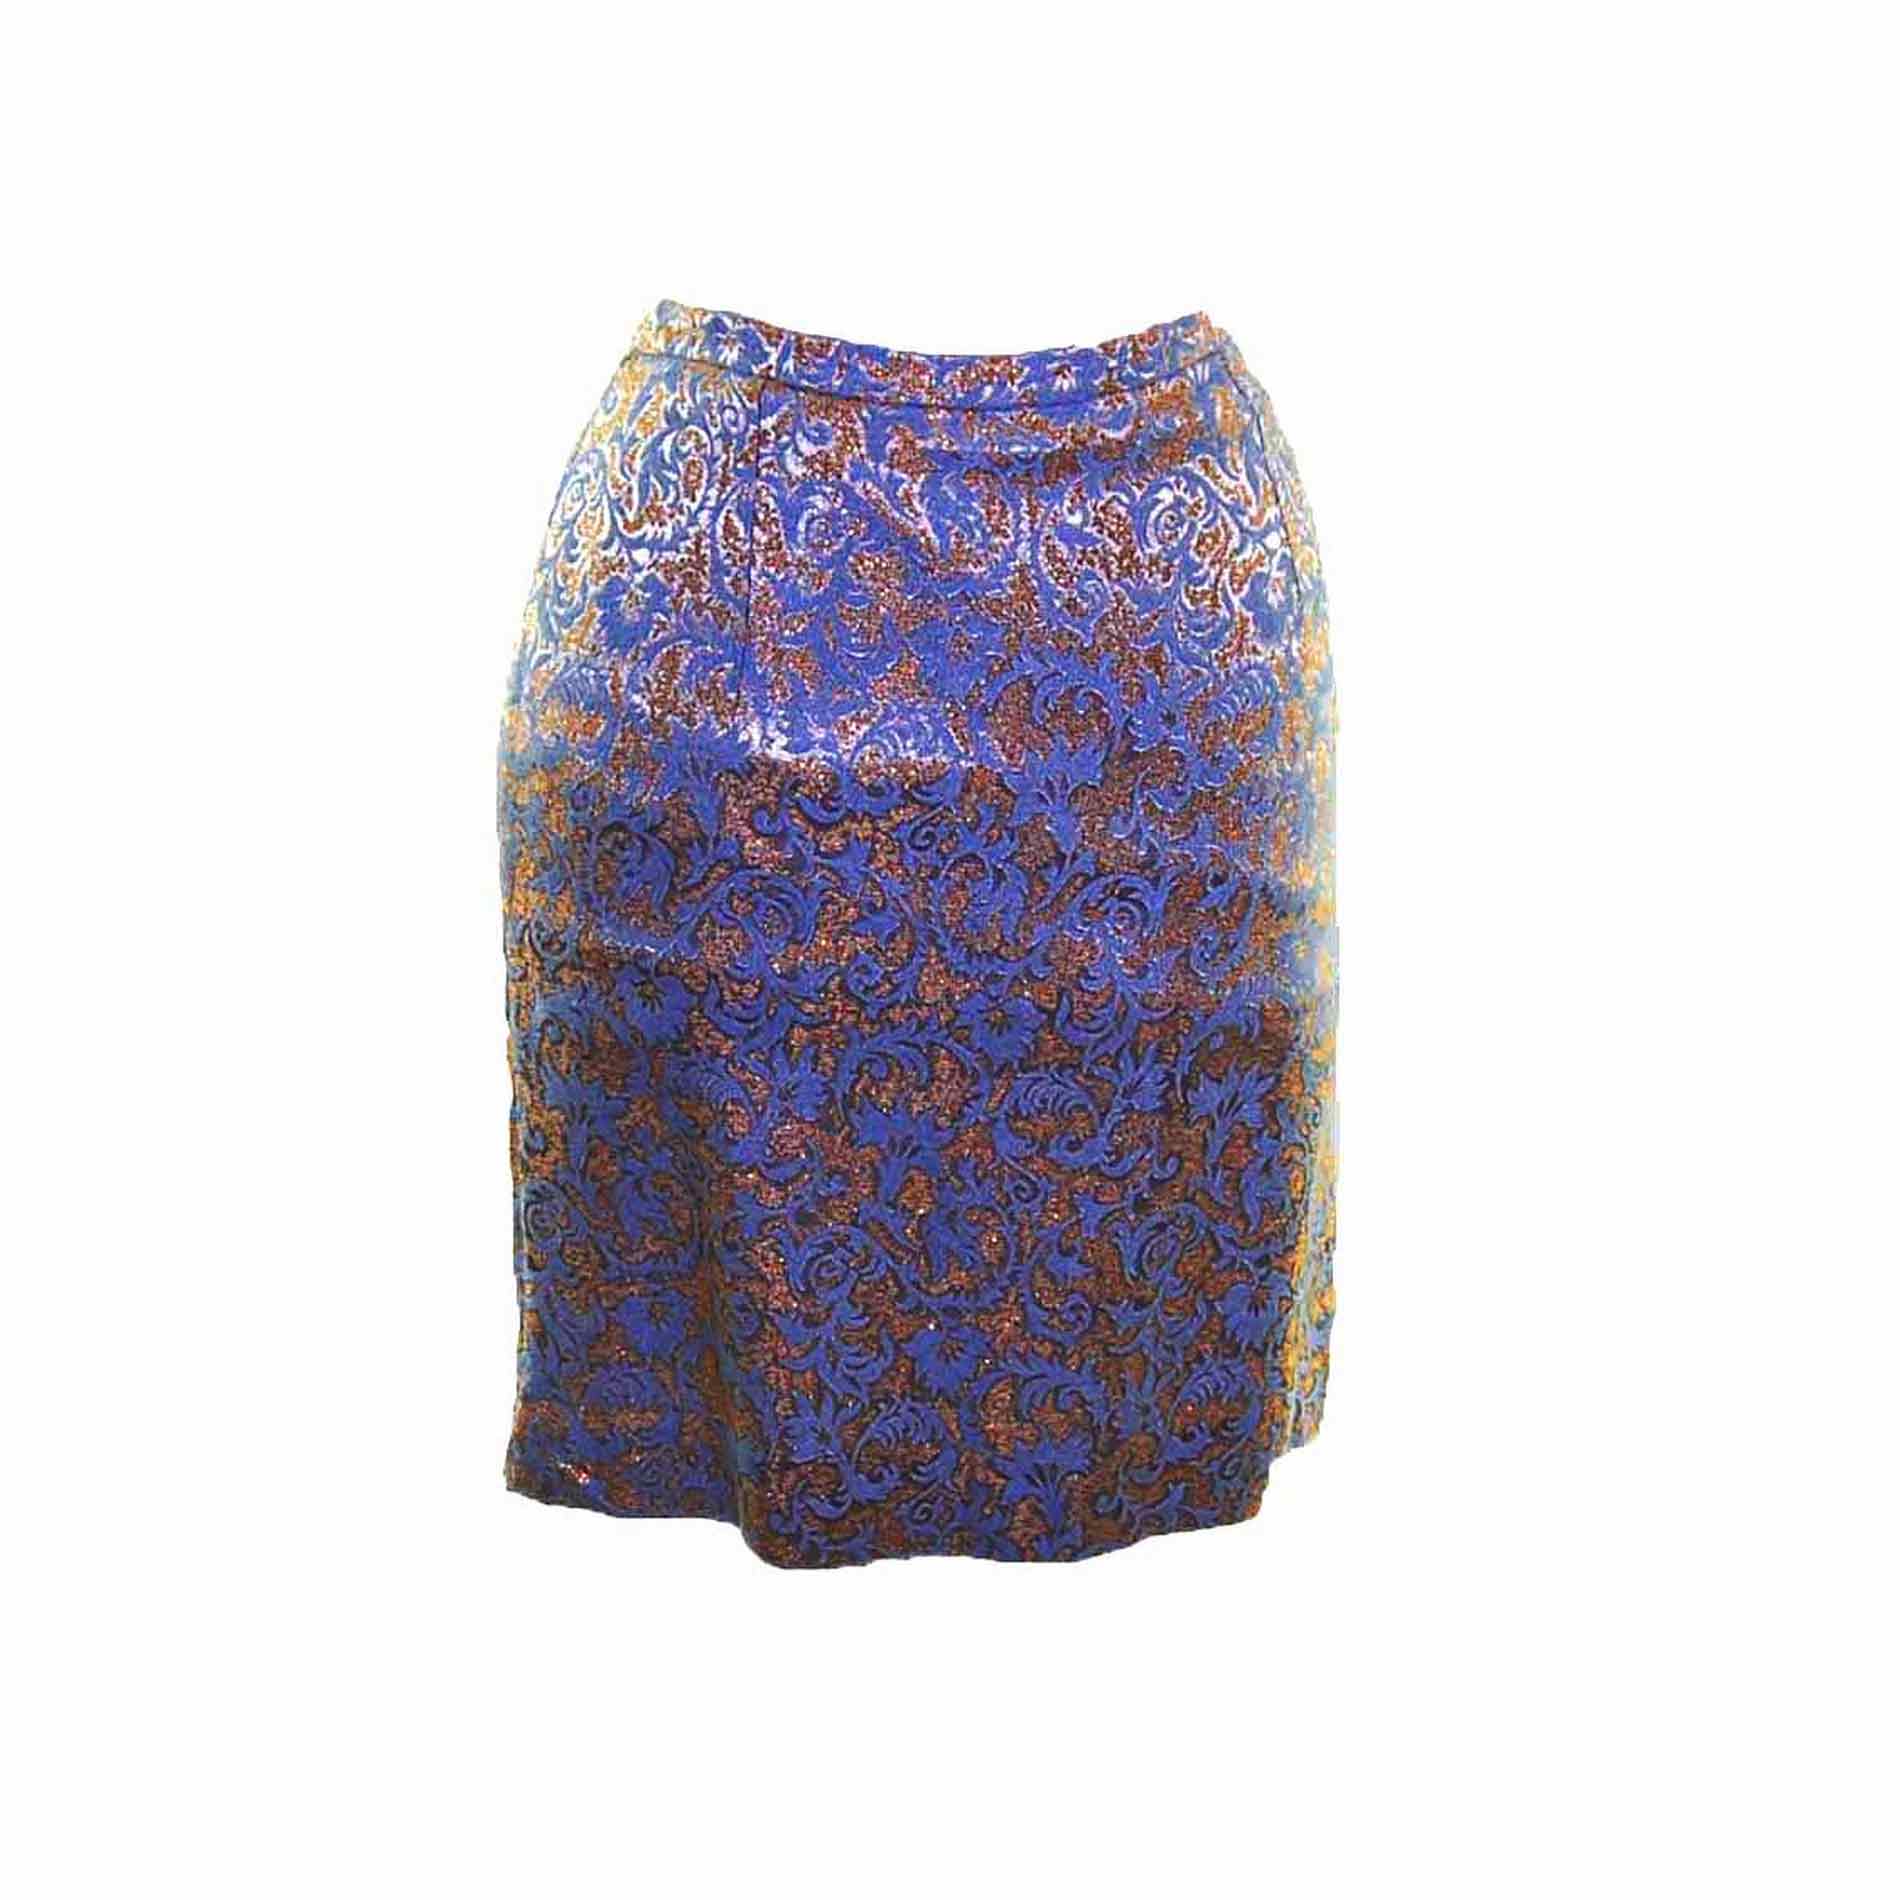 60s Blue and Gold Brocade Skirt - Blue 17 Vintage Clothing